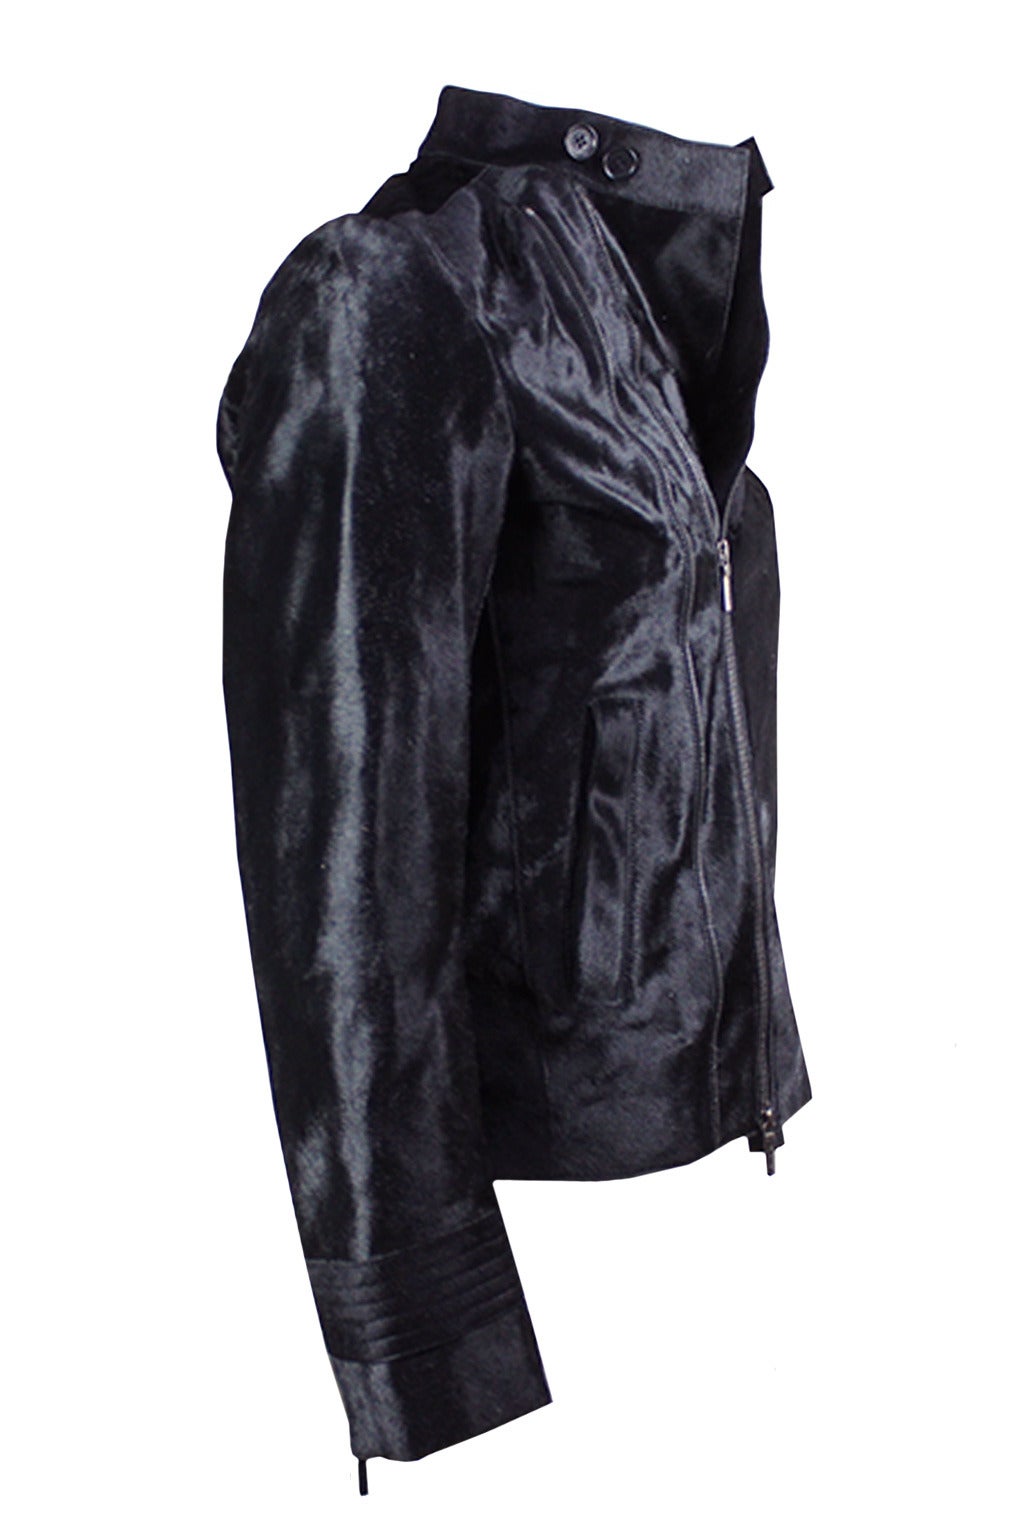 This luxurious black pony hair jacket has motocross styling. The relaxed silhouette has a double zippered front and bold zippers in each arm. The mask closure has two buttons. Other features are a diagonal slash pocket at the breast and two more